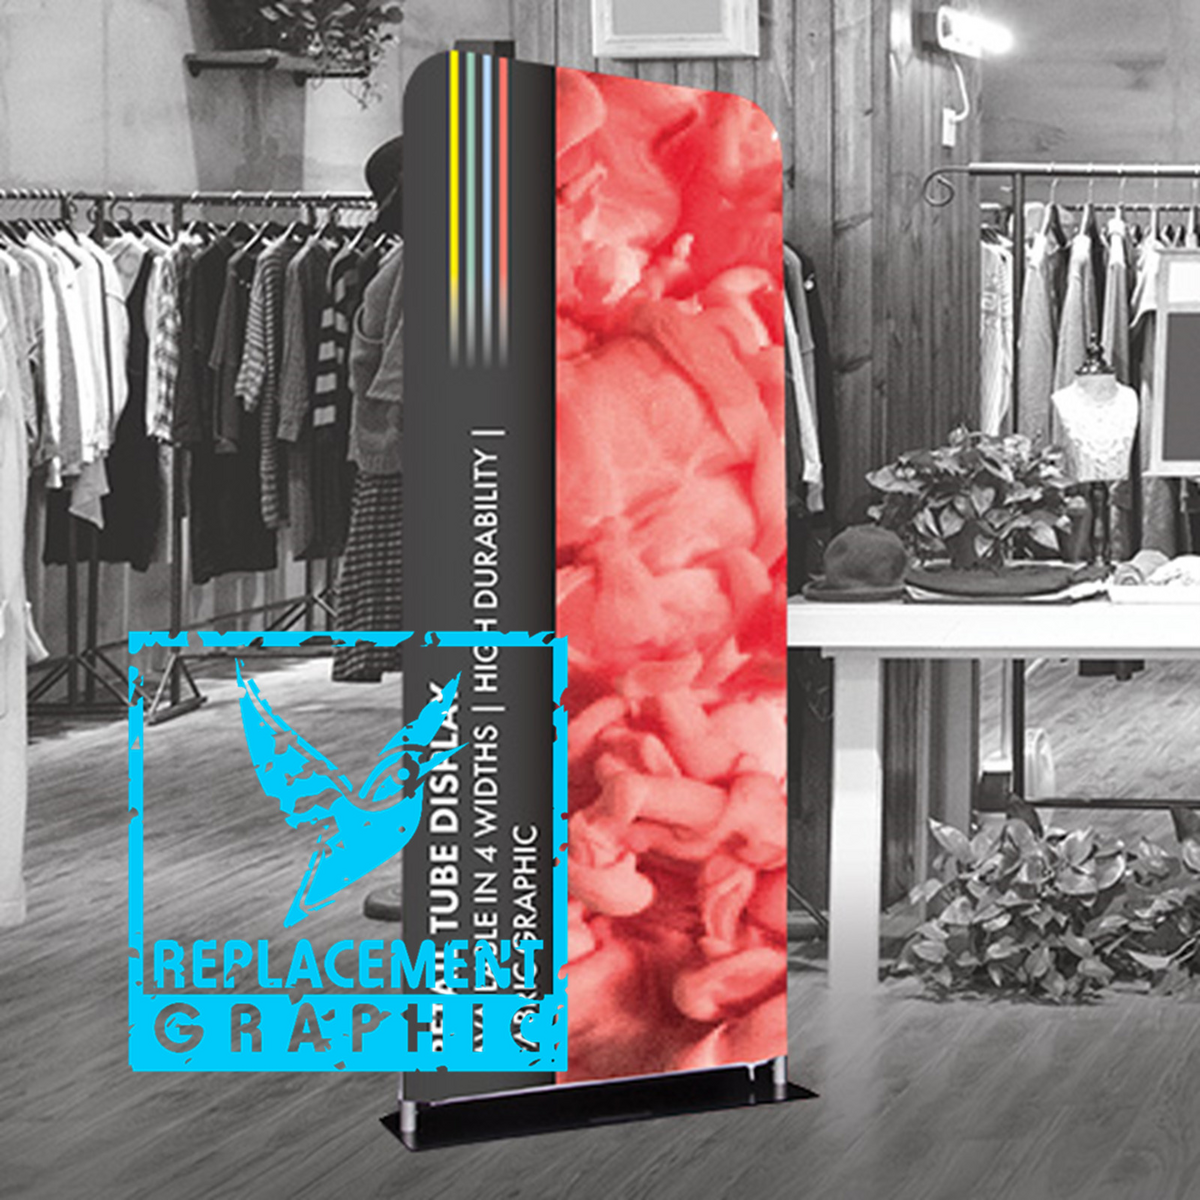 Retail Fabric Tube Display Replacement Graphic.png